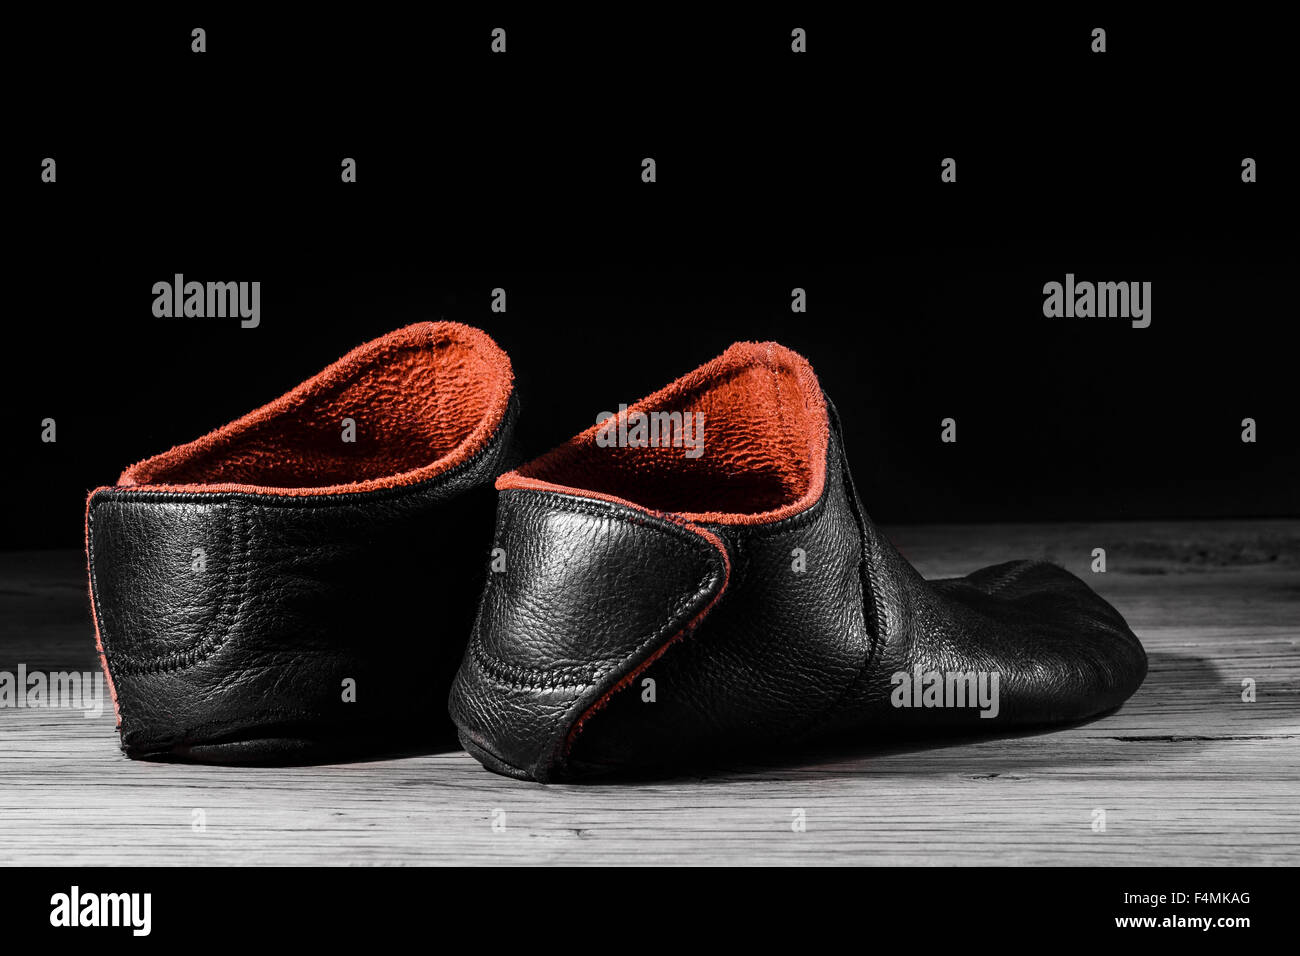 Empty slipper shoe design at home in creative light. Concept relax, weekend, rest. On black background. Stock Photo